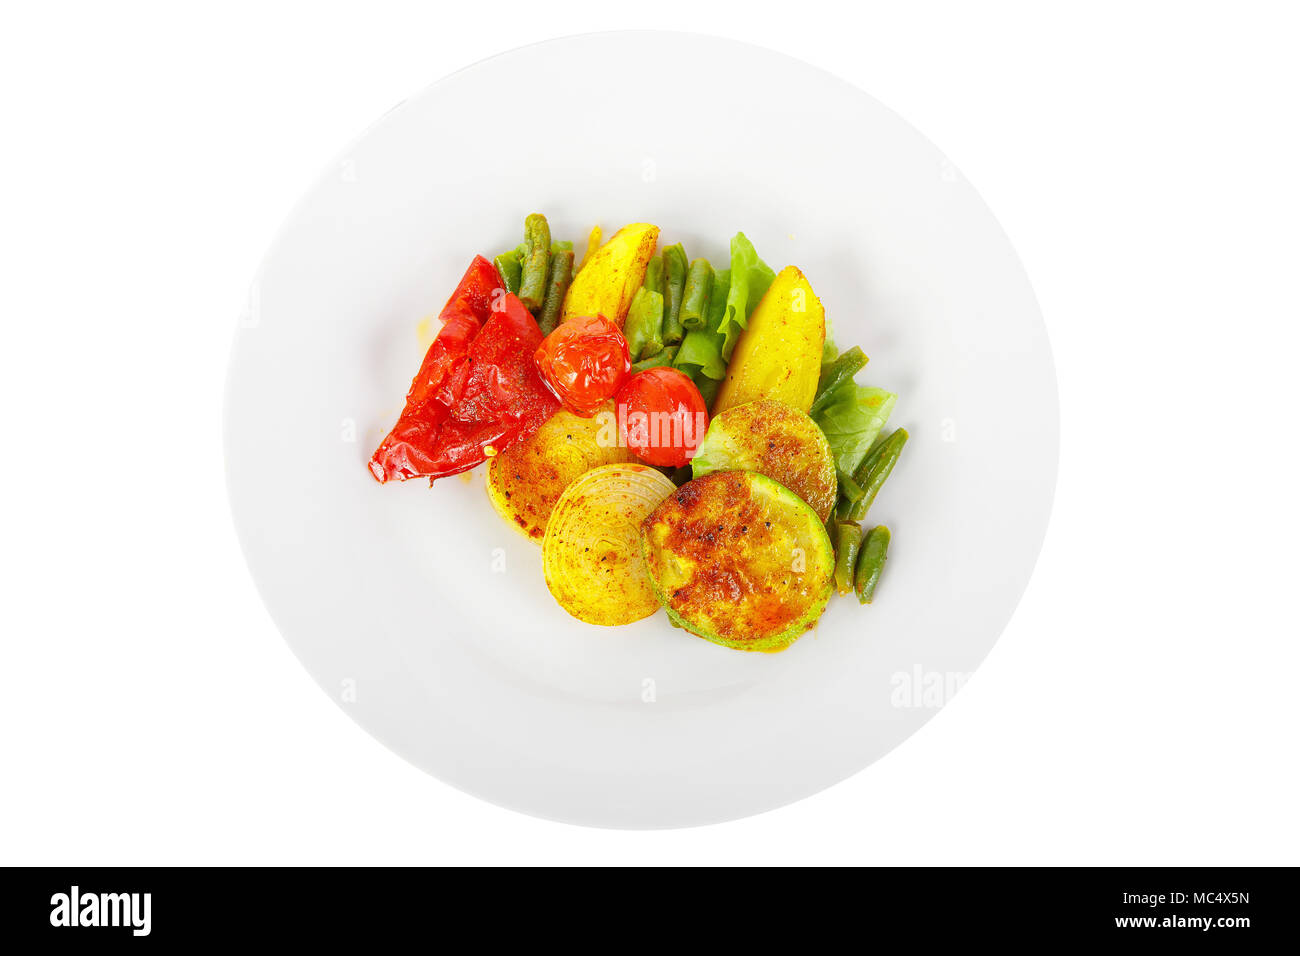 Vegetables grilled portion of side dish on a plate on white isolated background view from above. Appetizing dish for the menu restaurant, bar, cafe Stock Photo